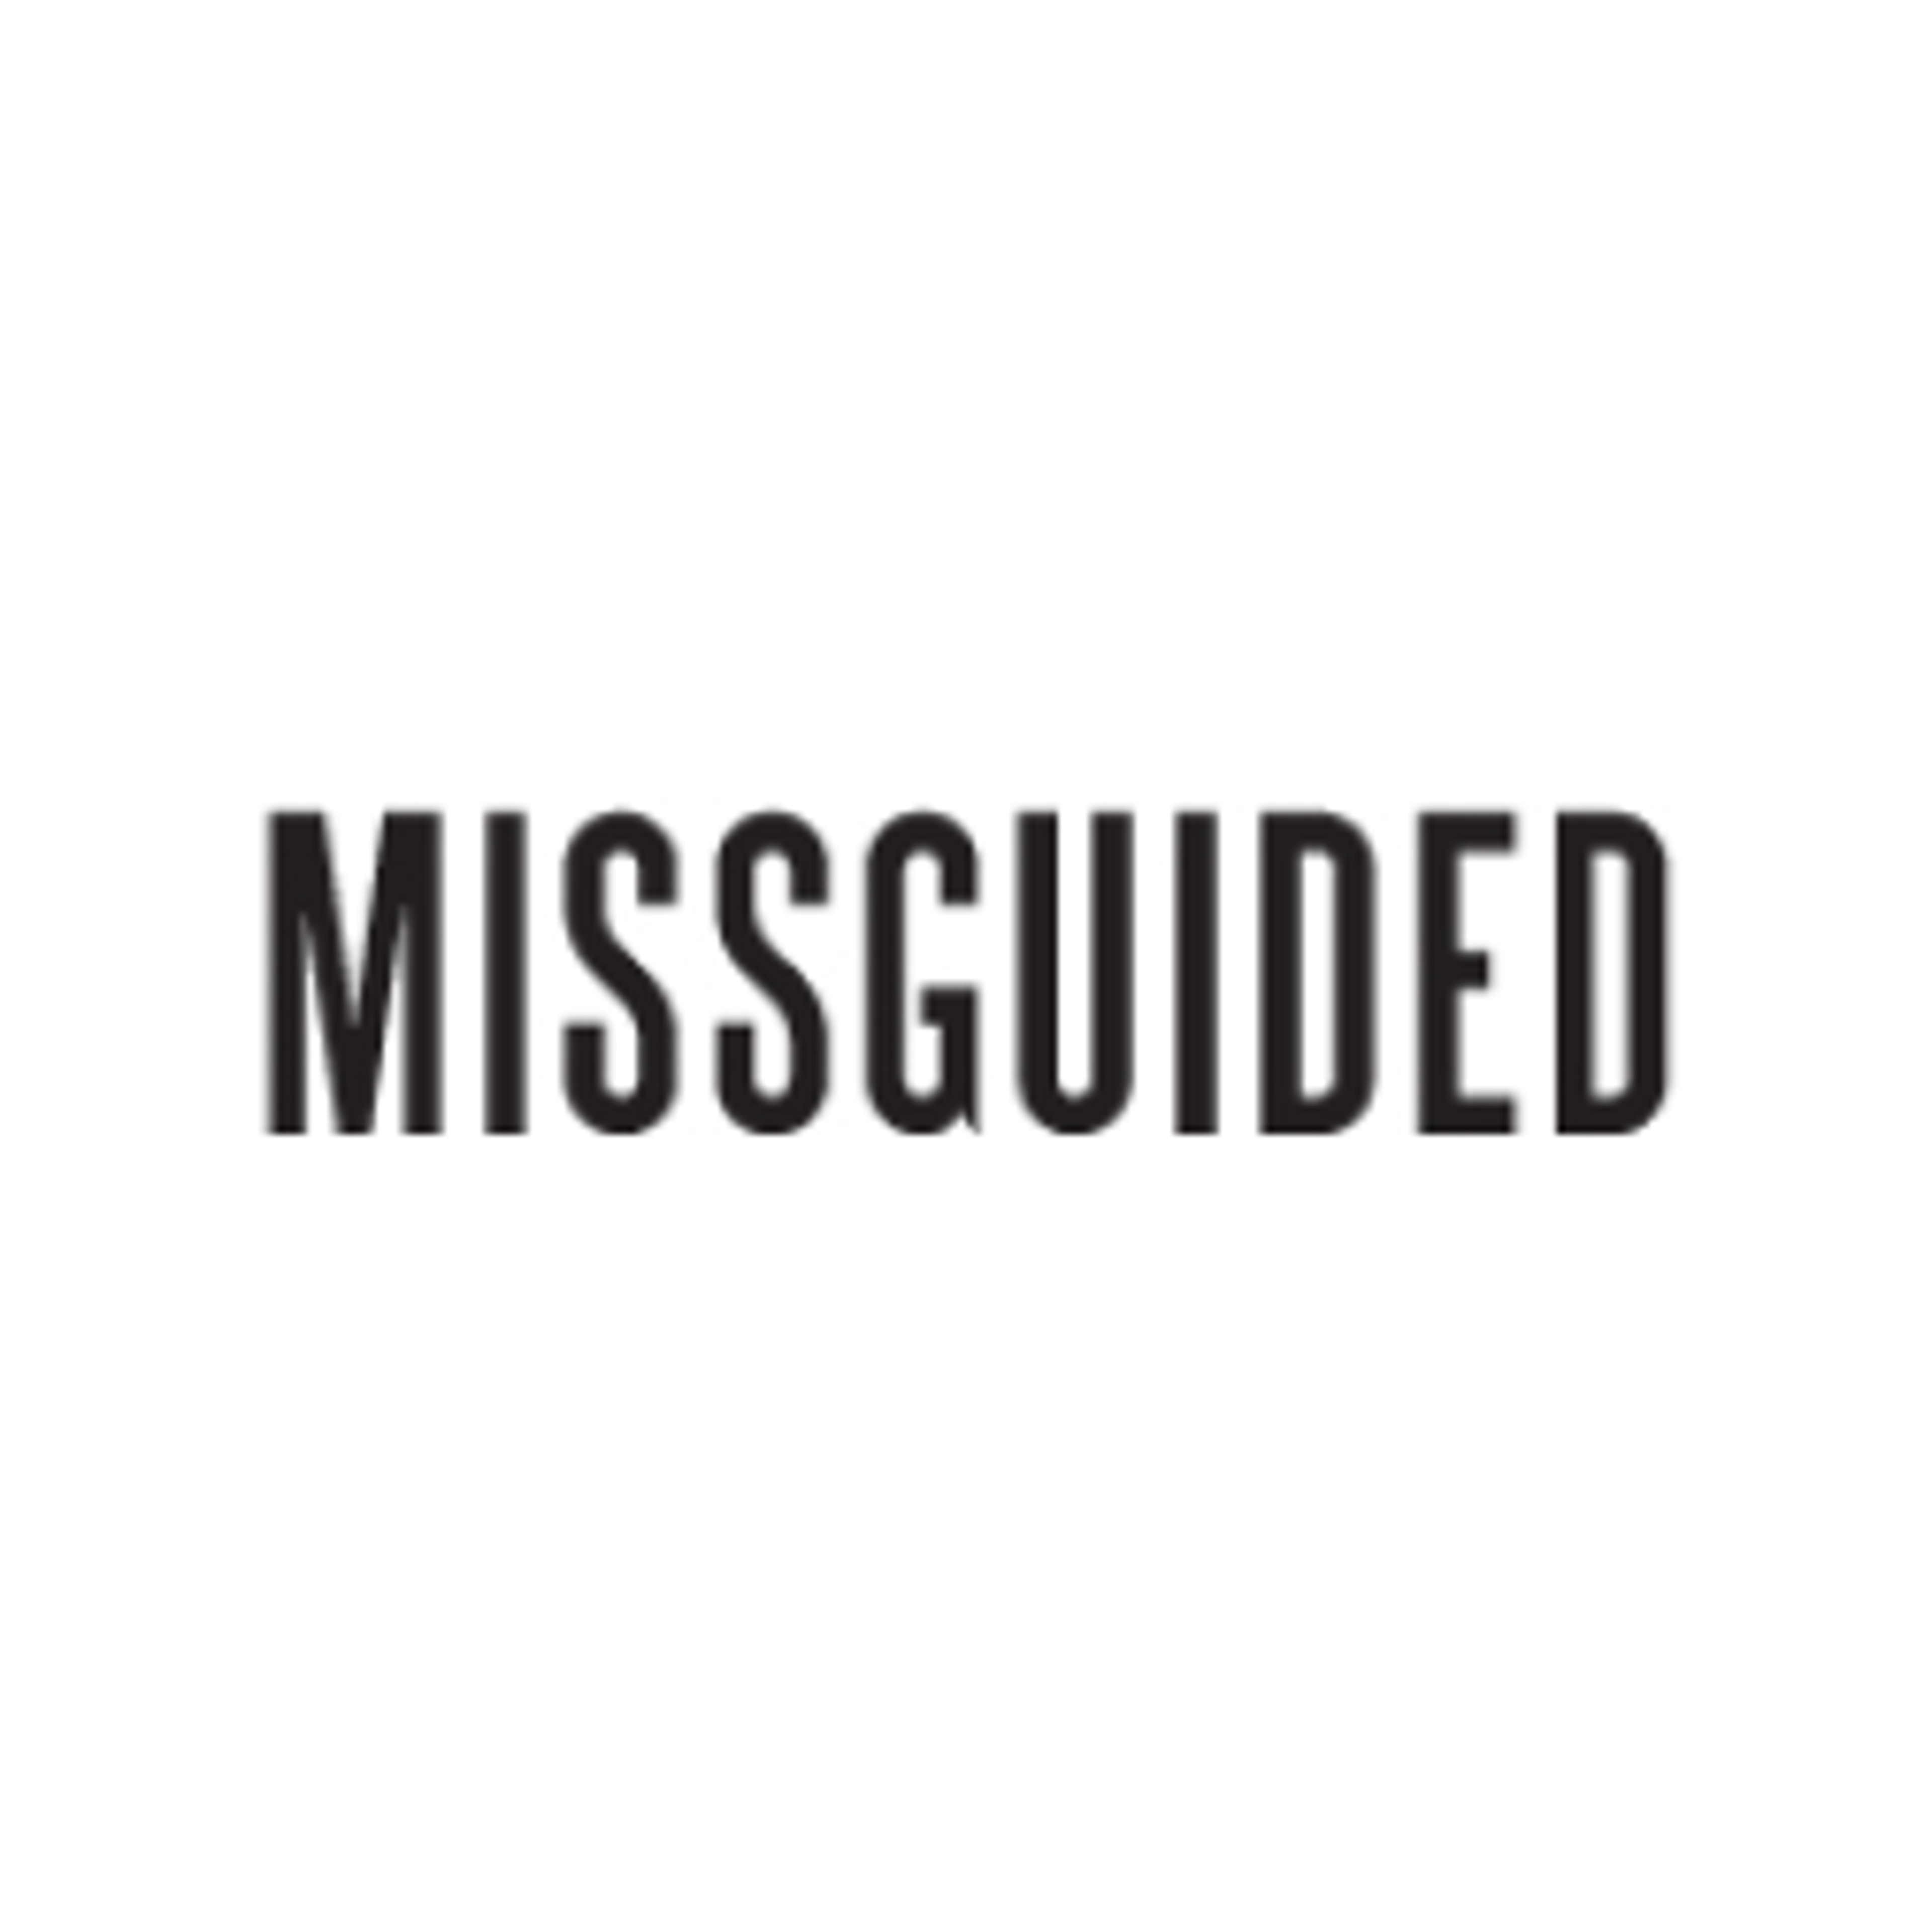  Missguided 